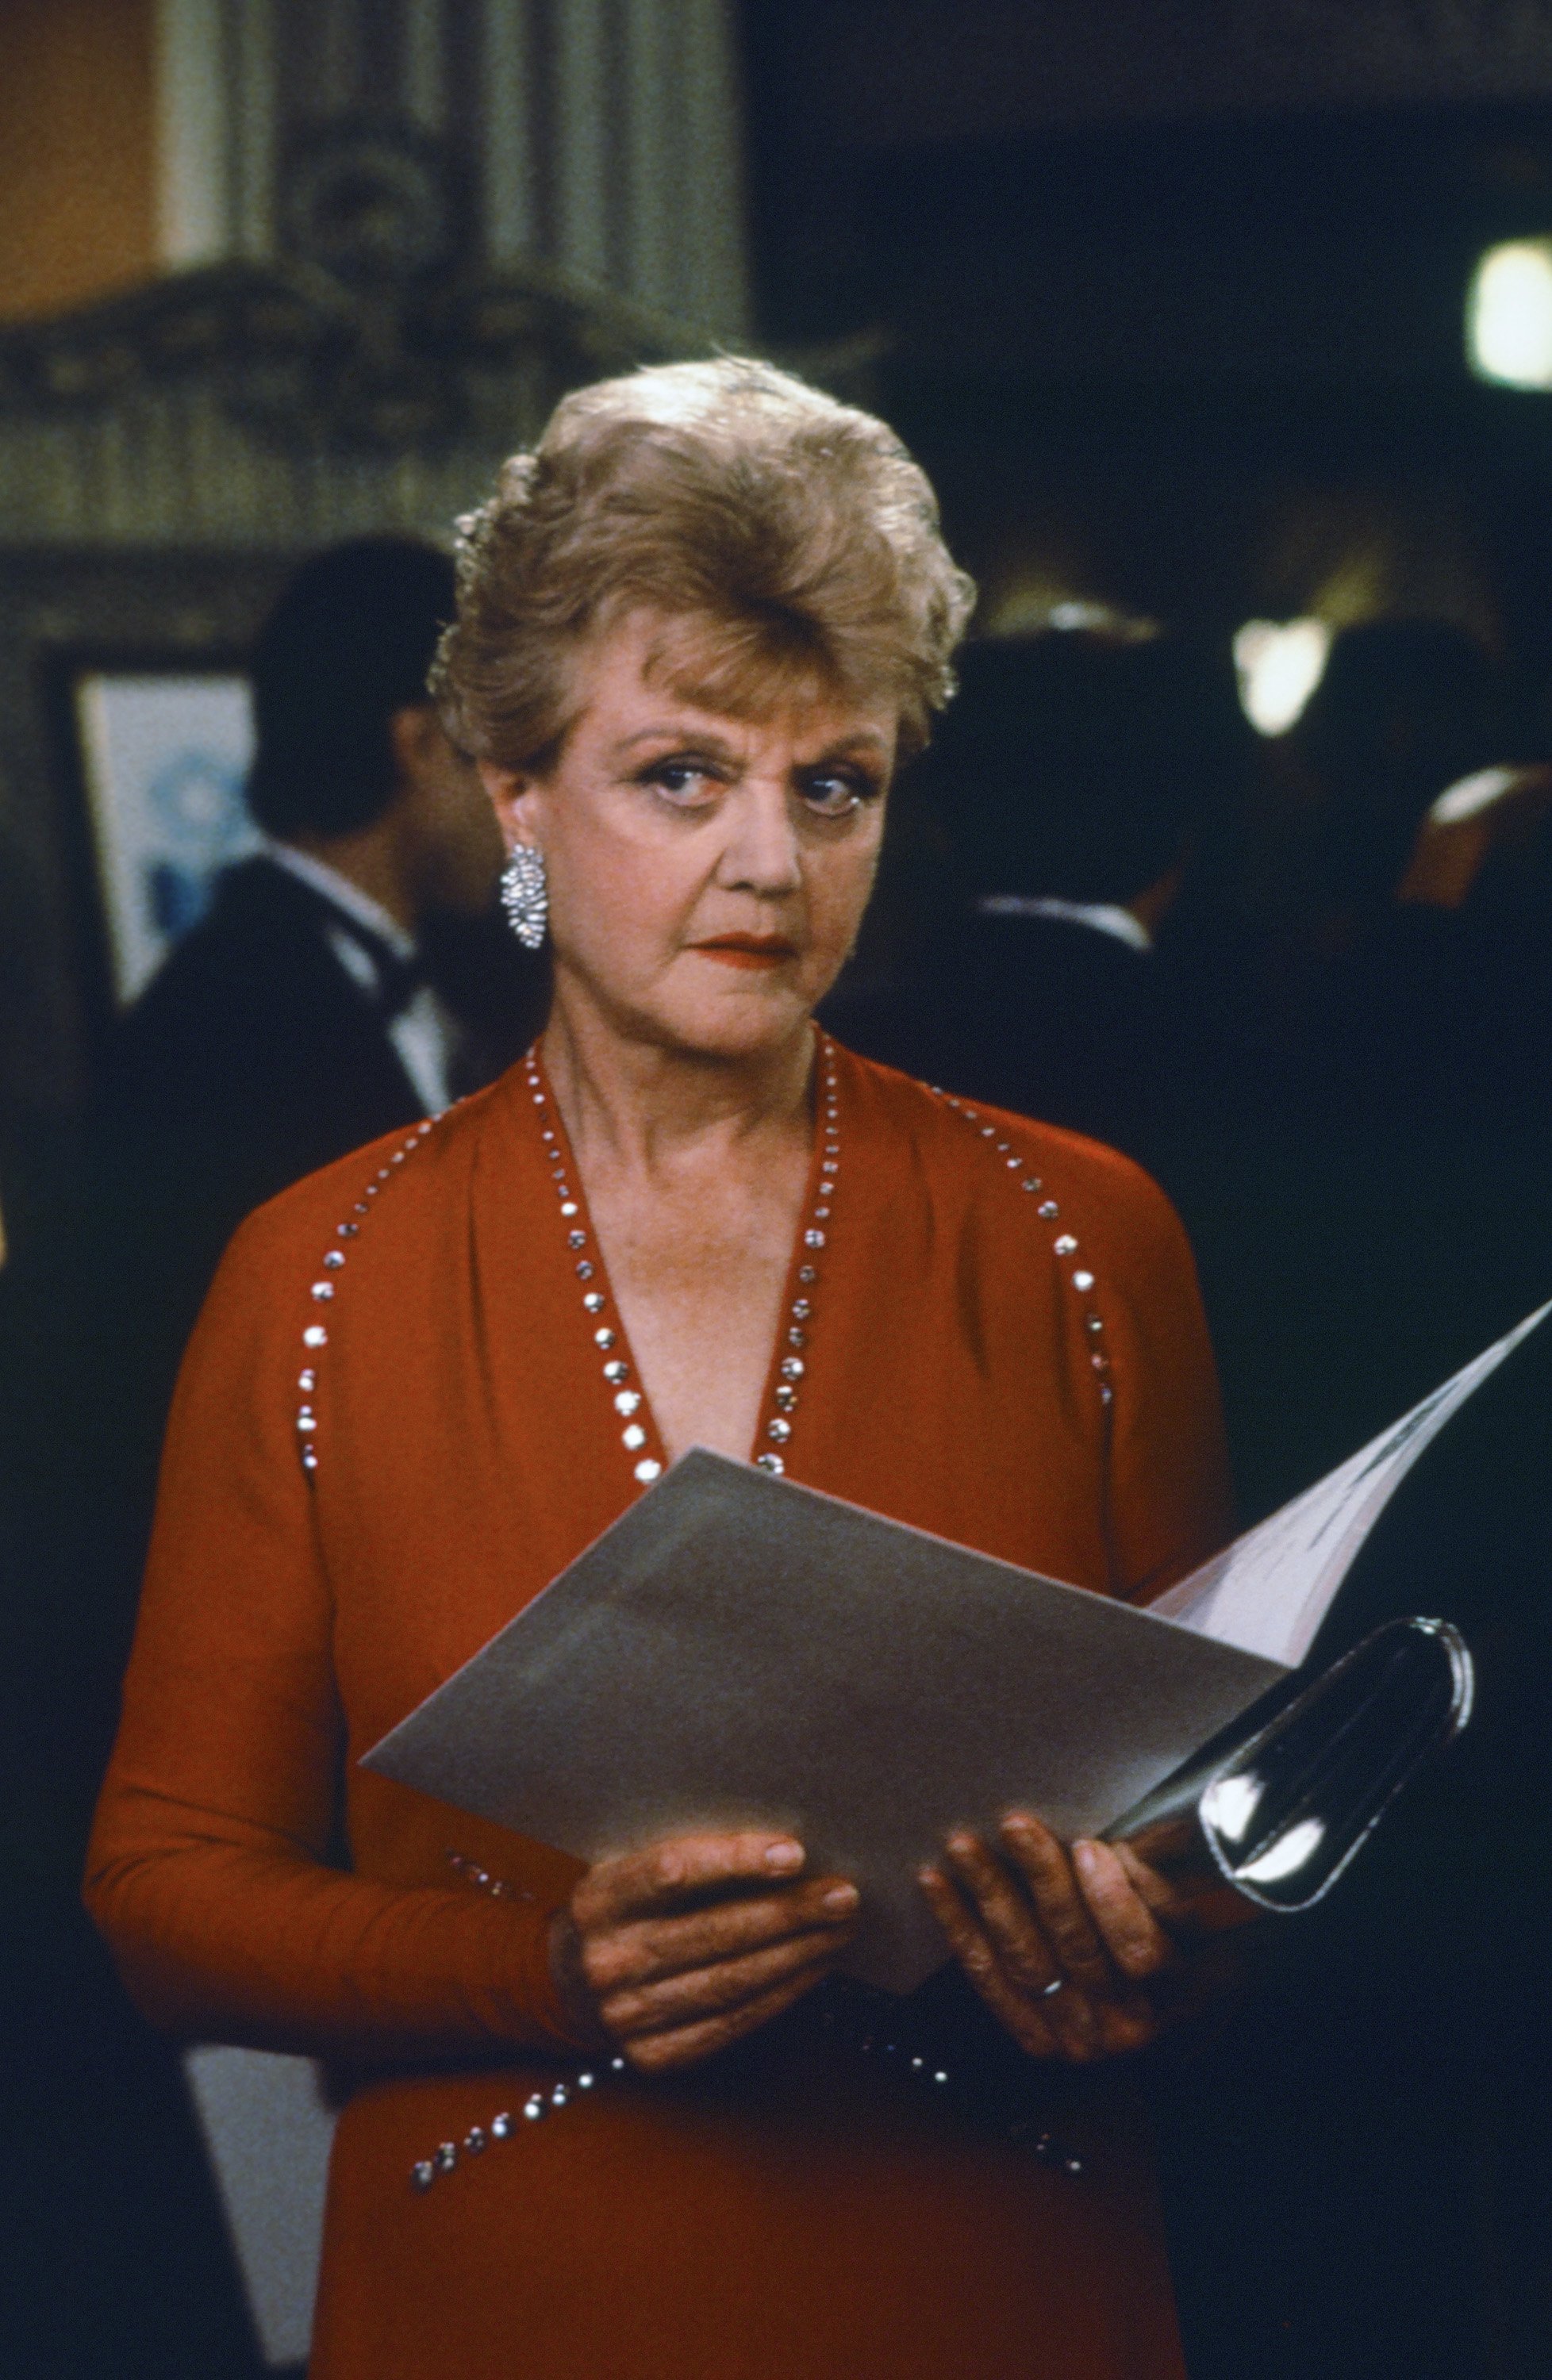 Angela Lansbury on "Murder she Wrote" in 1992. | Source: Getty Images